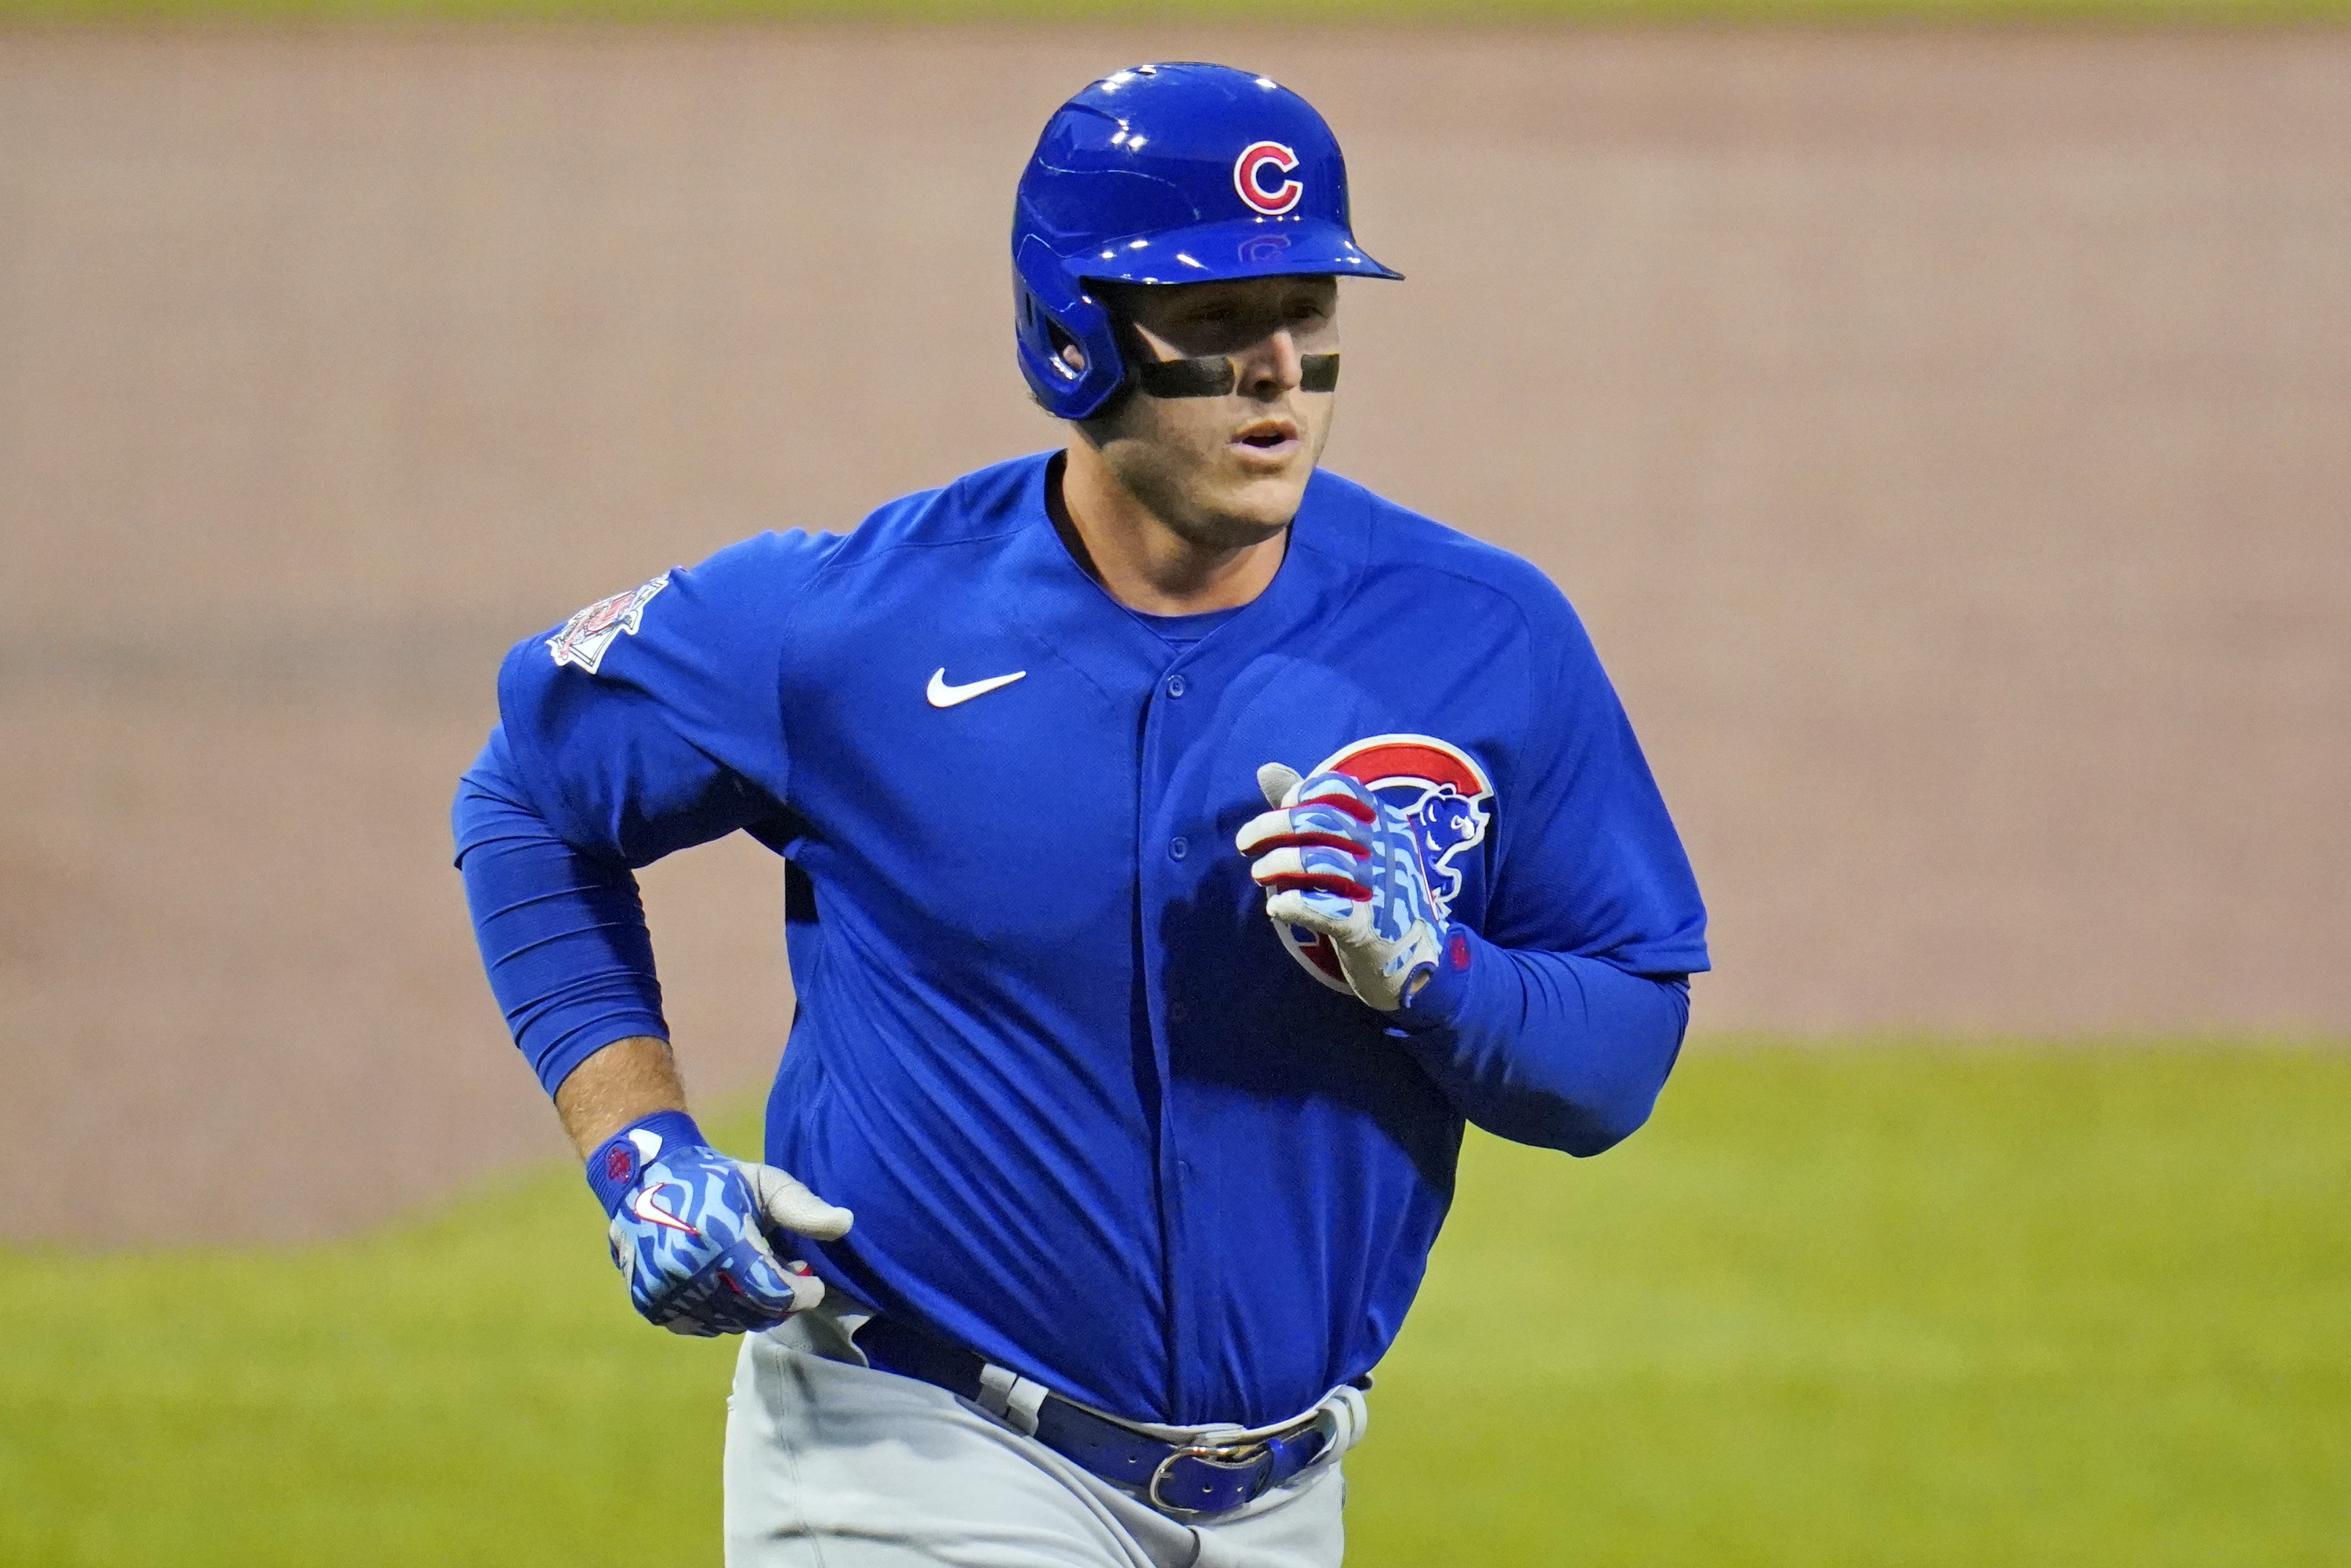 Can You Put a Price On Anthony Rizzo's Cubs 2016 World Series Last